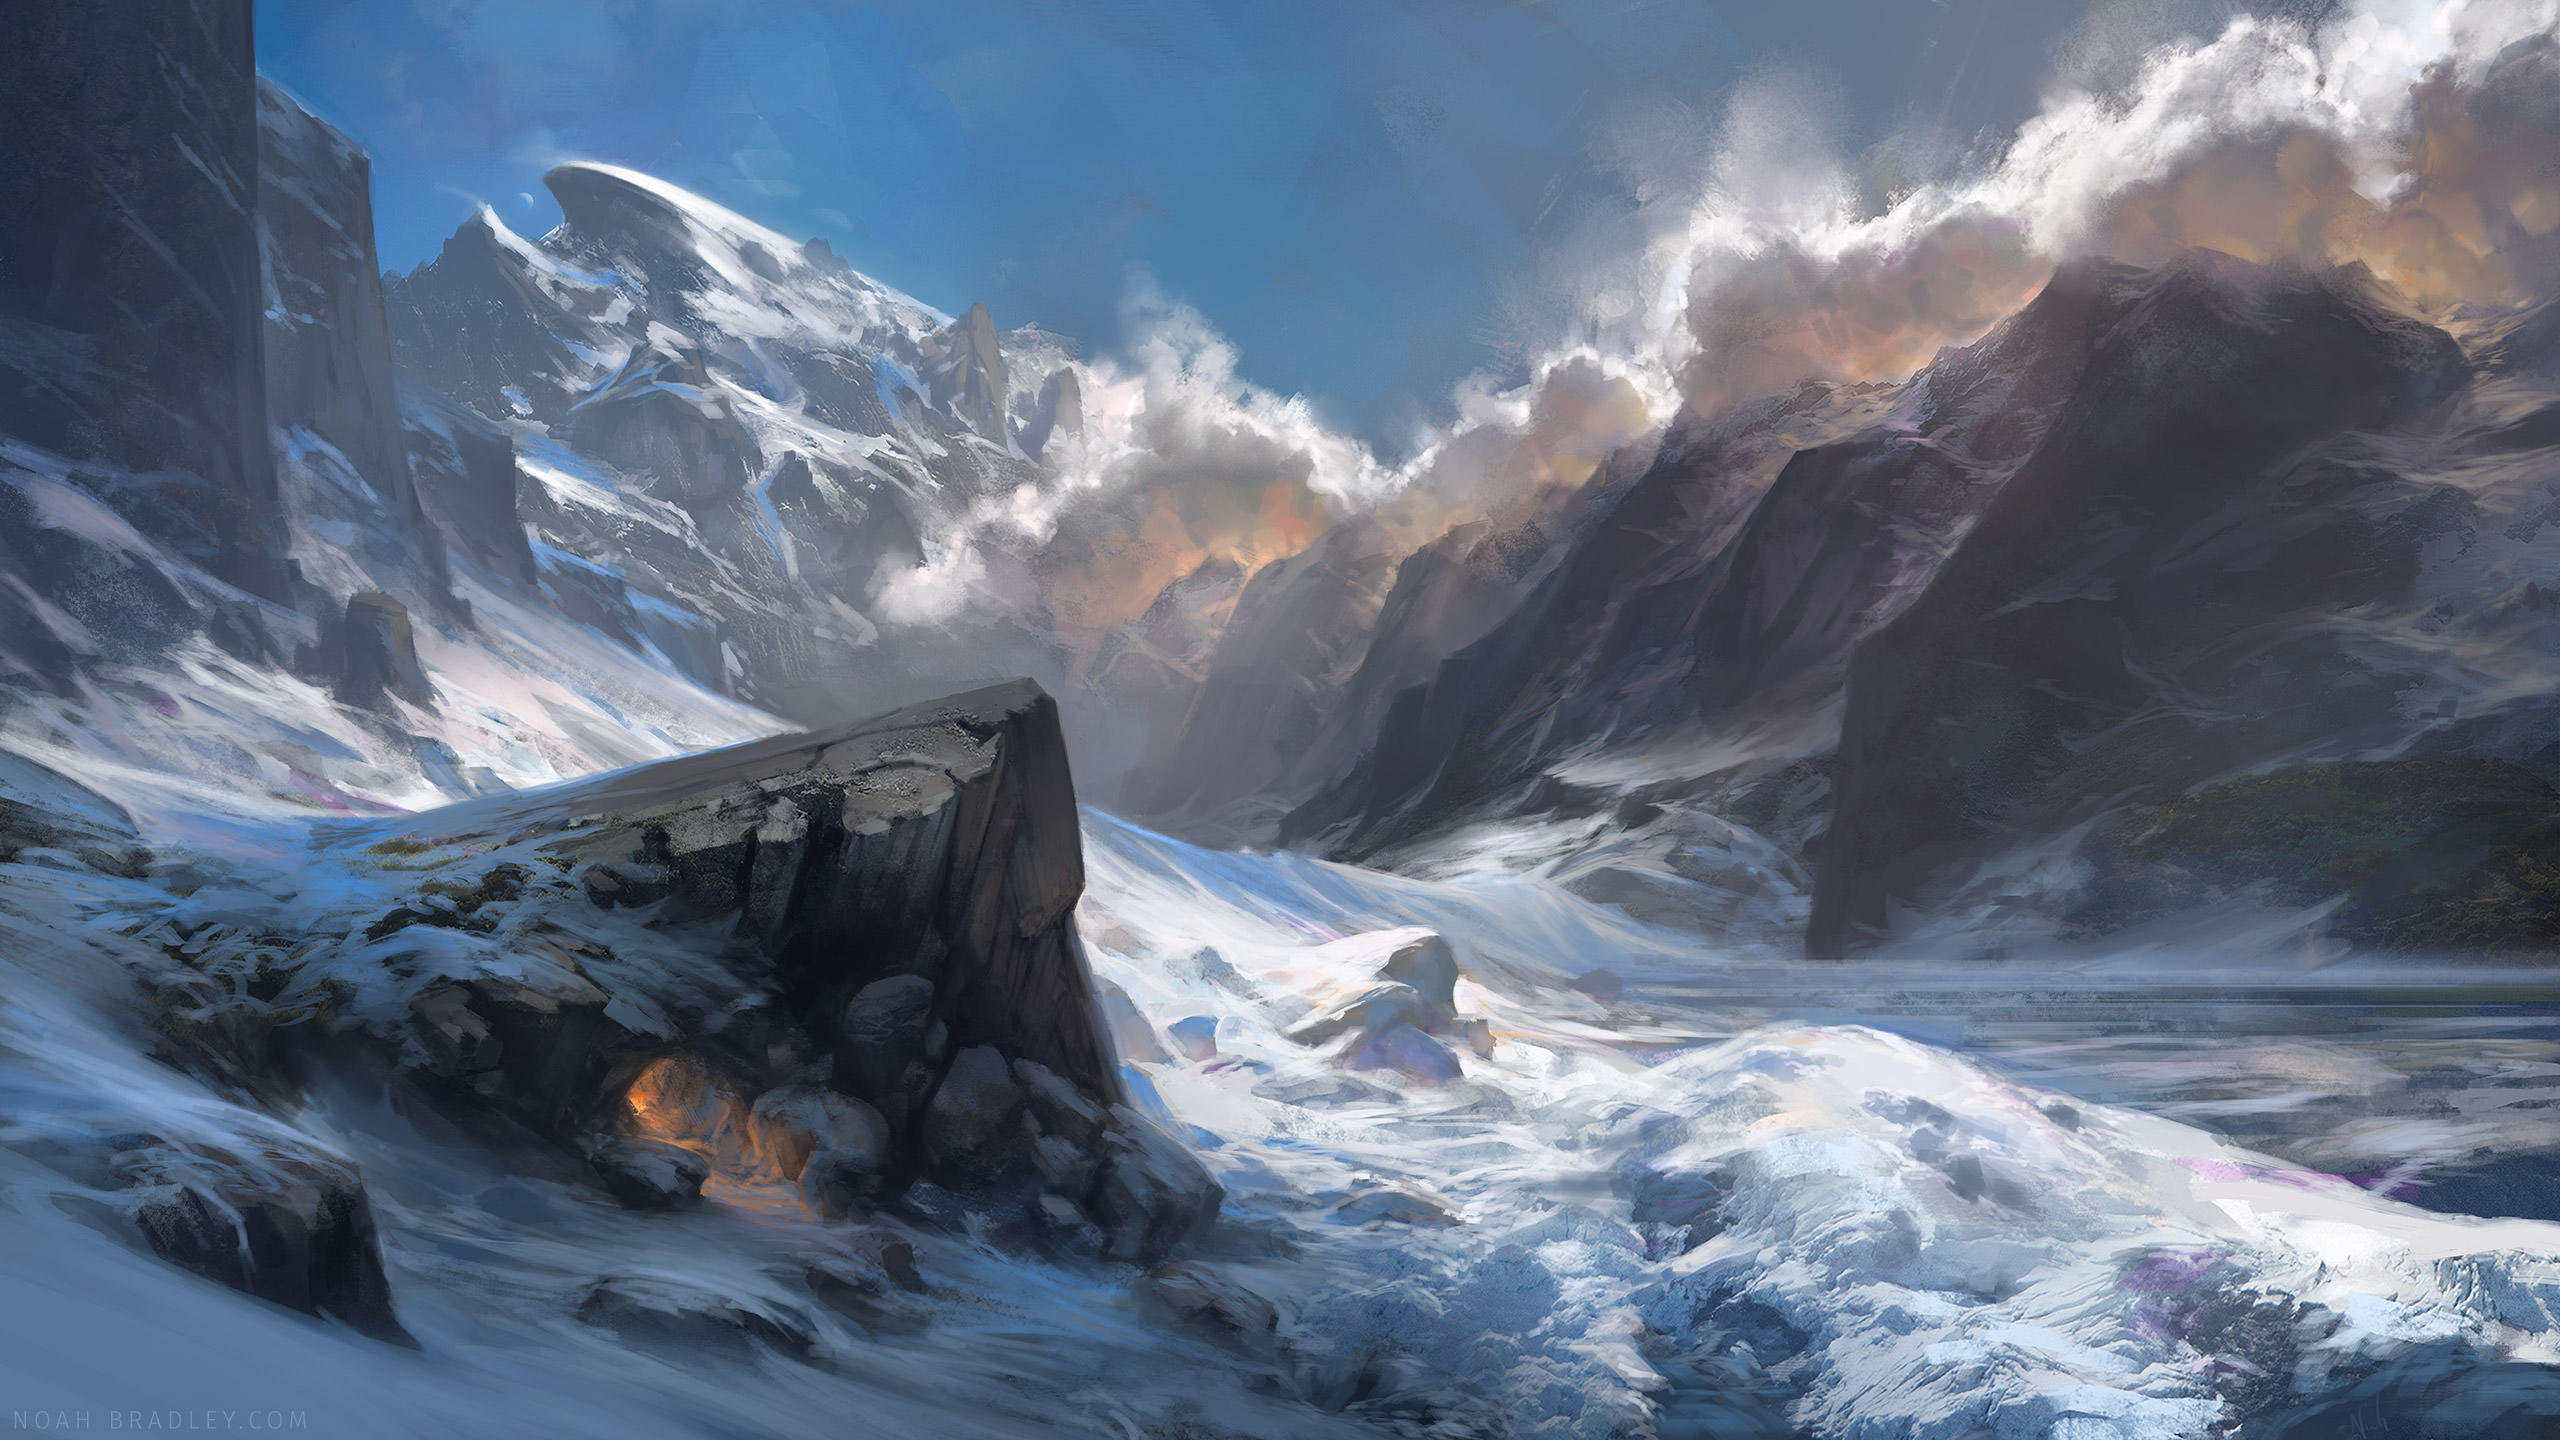 A Place to Call Home by Noah Bradley